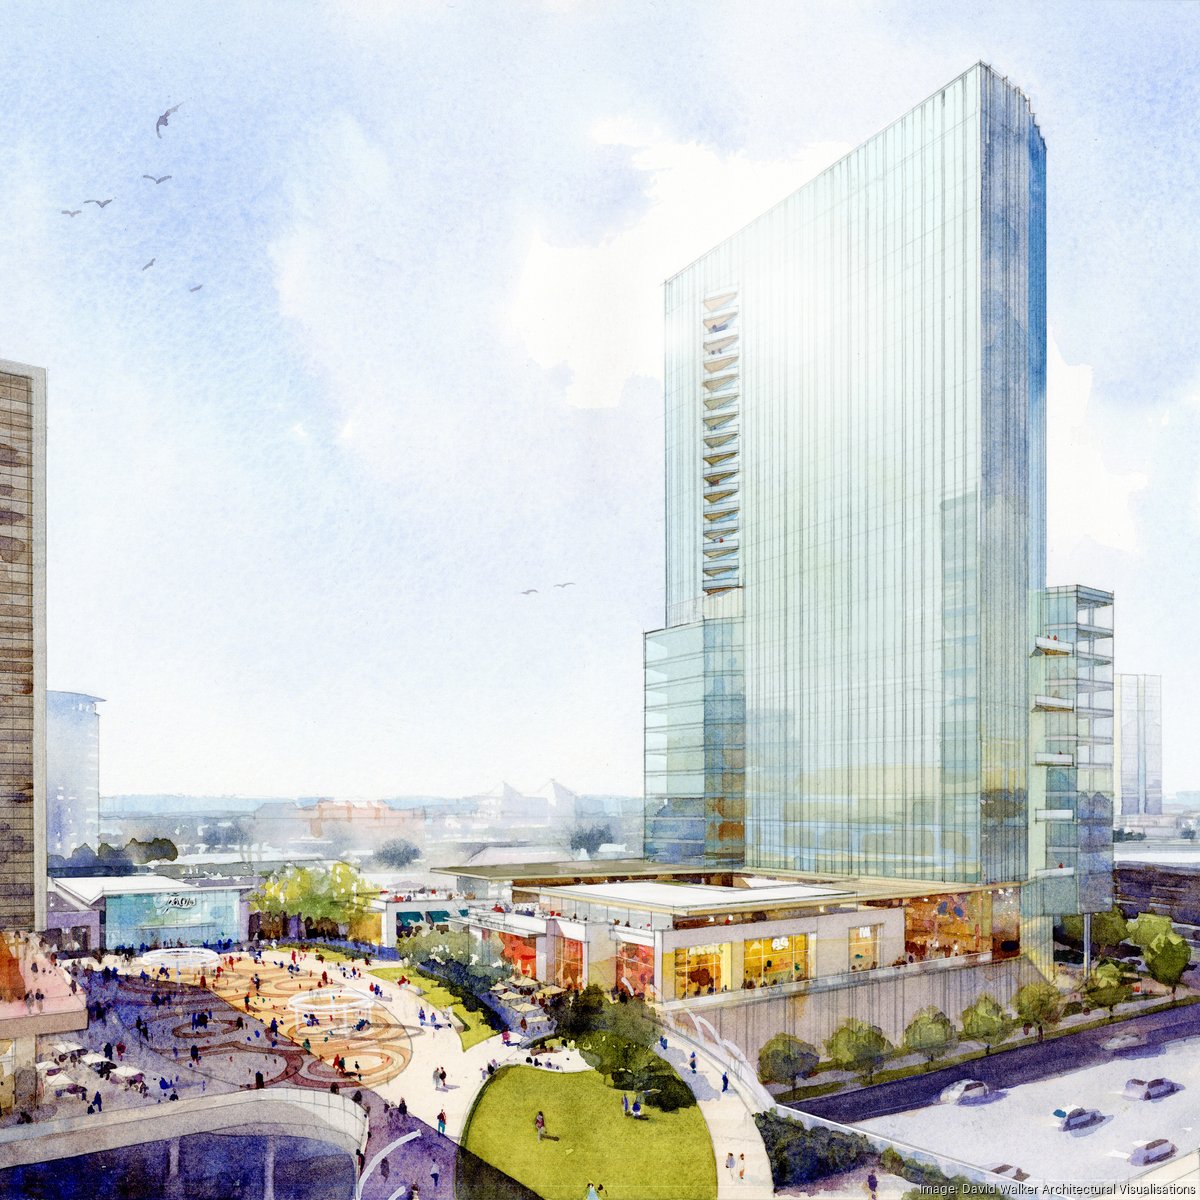 Macerich submits plans for more development at Tysons Corner